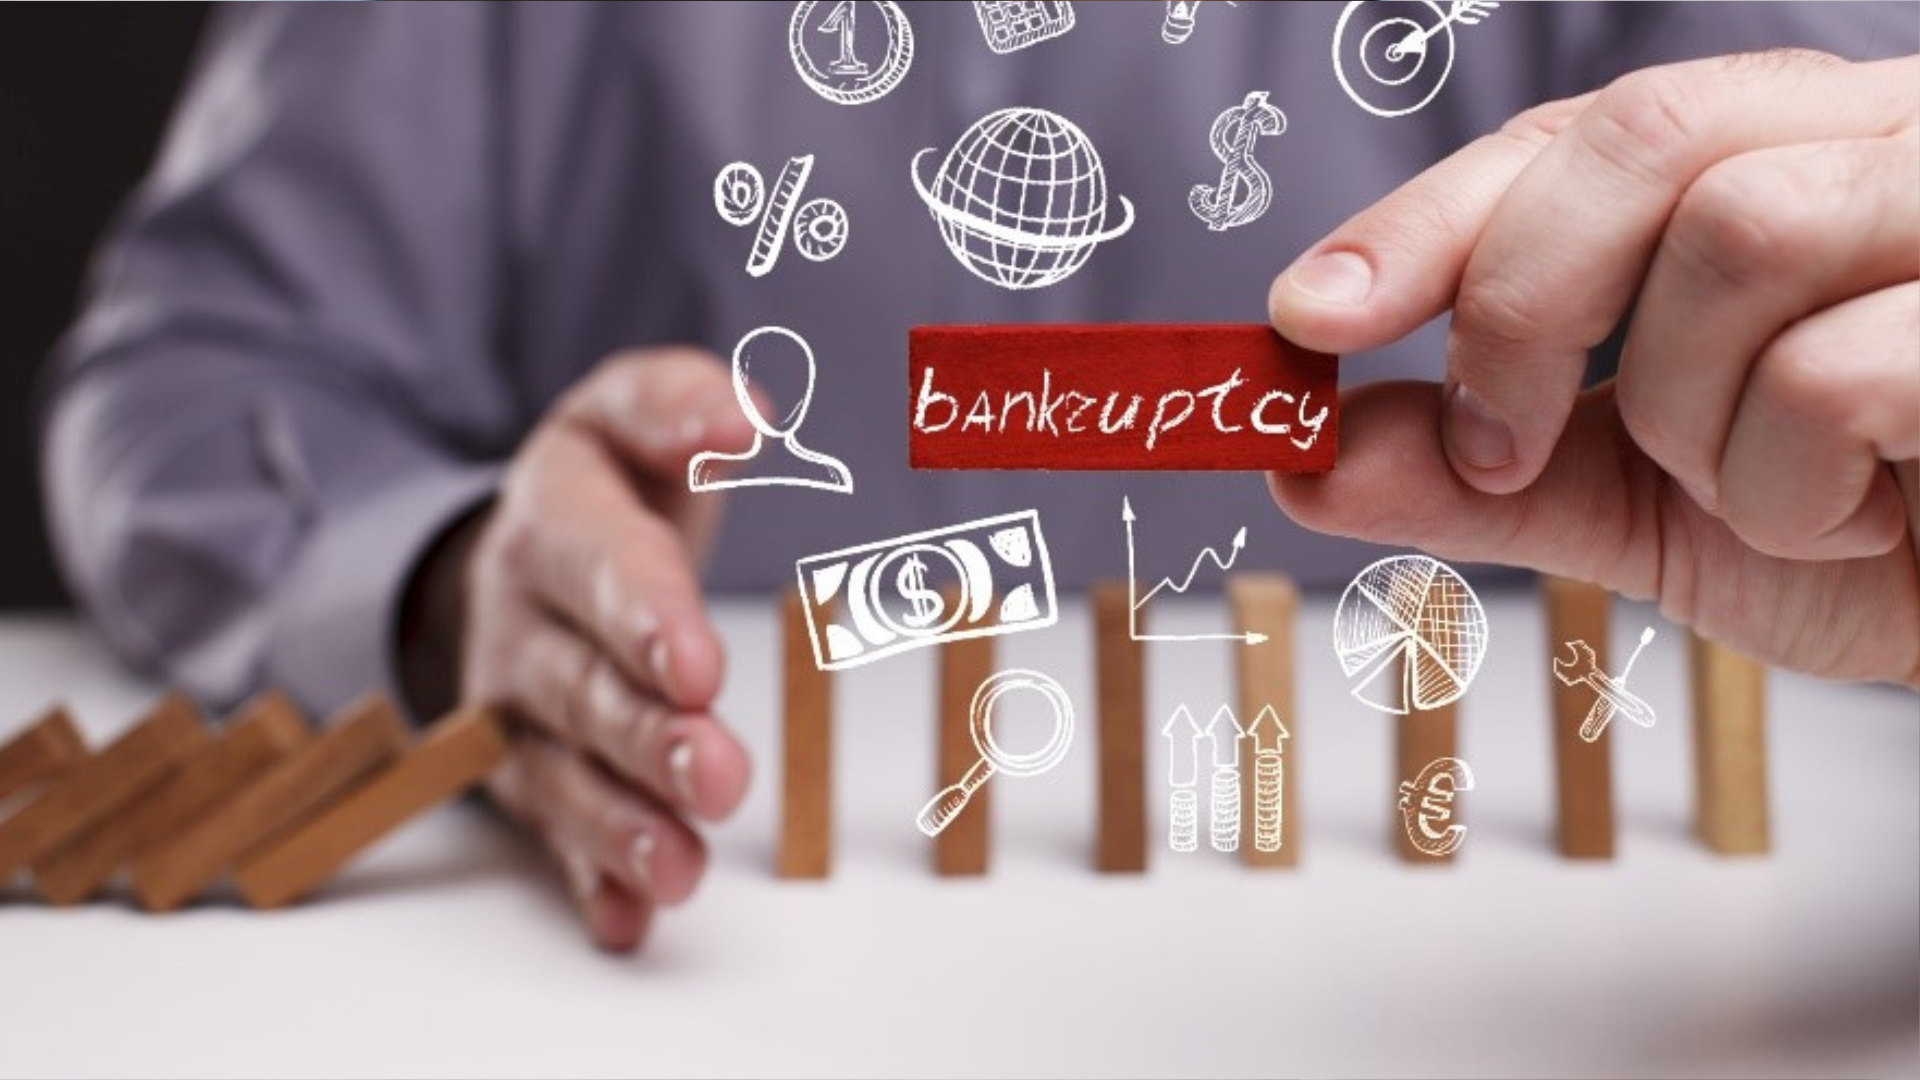 Property loss during bankruptcy